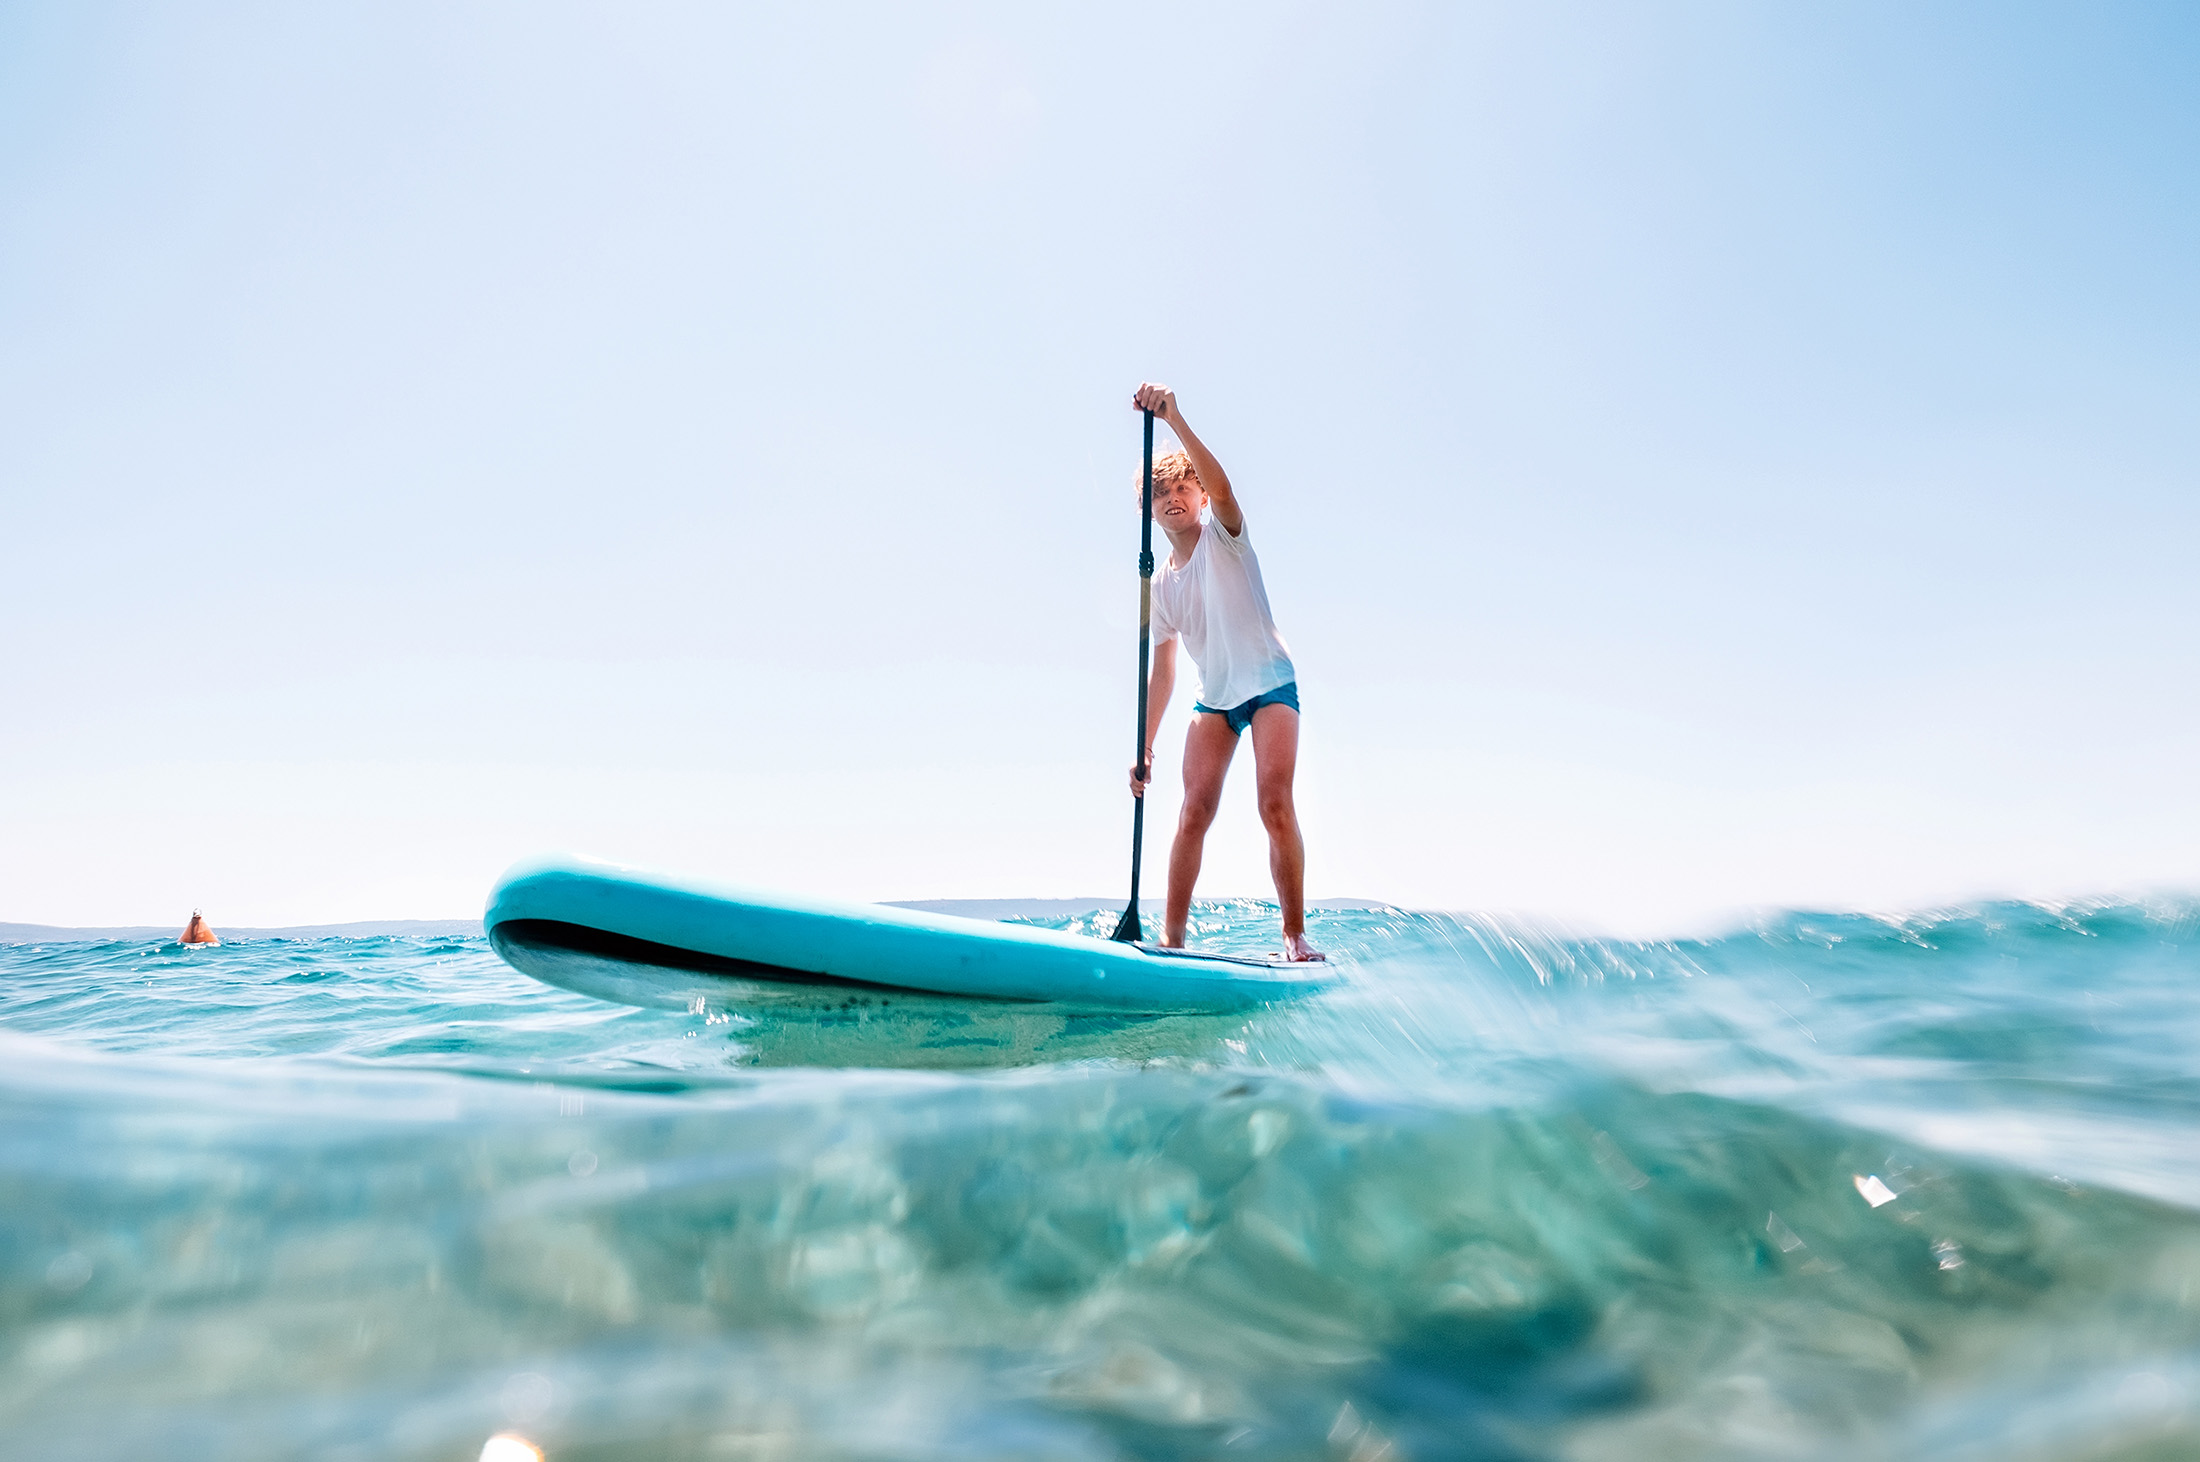 A child enjoys paddle boarding in the ocean near Twin Fin